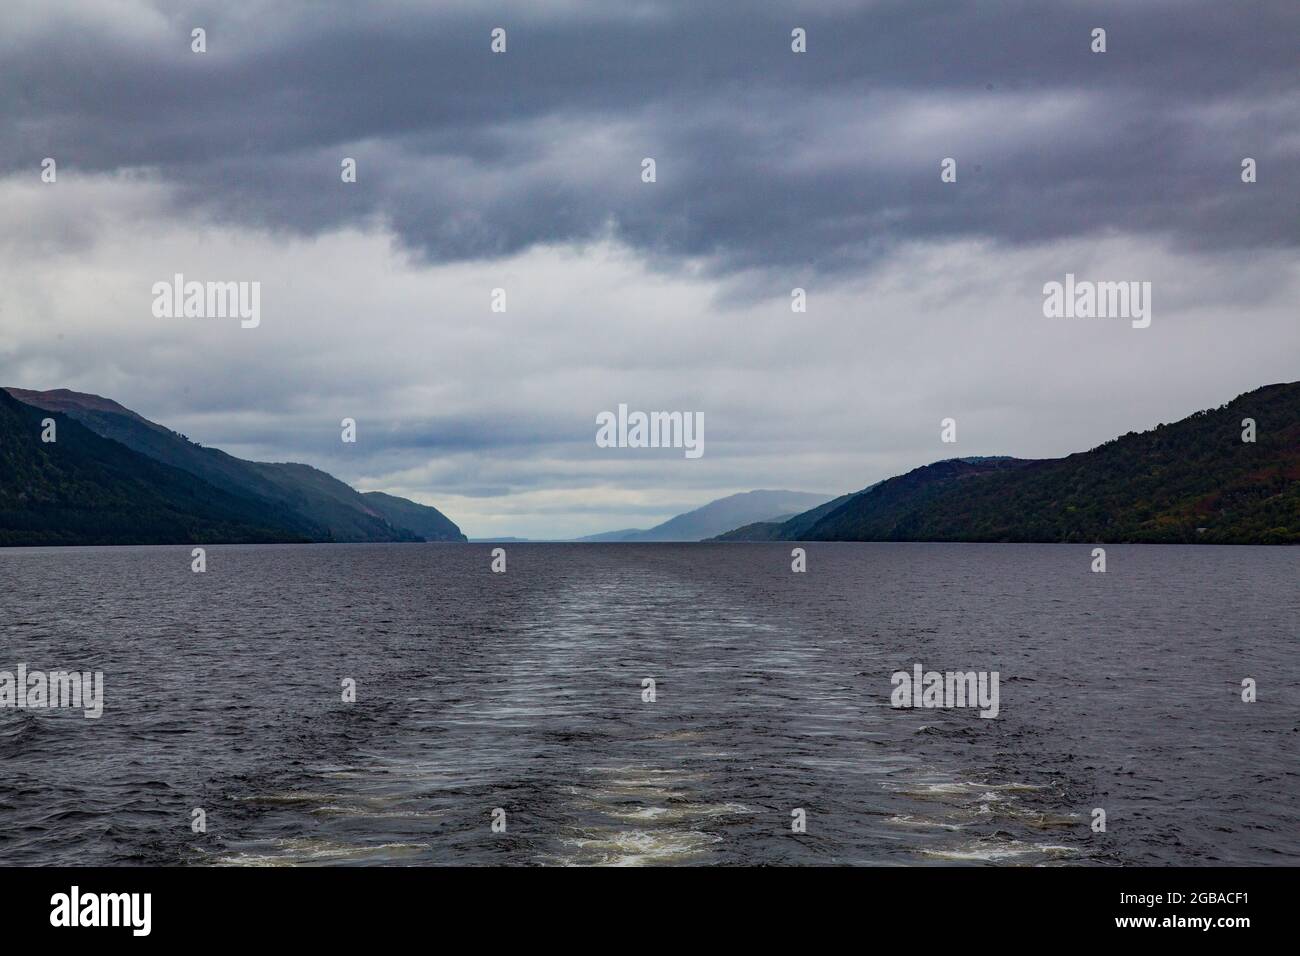 Mysterious Loch Ness with dark waters and picturesque shores lined with ...